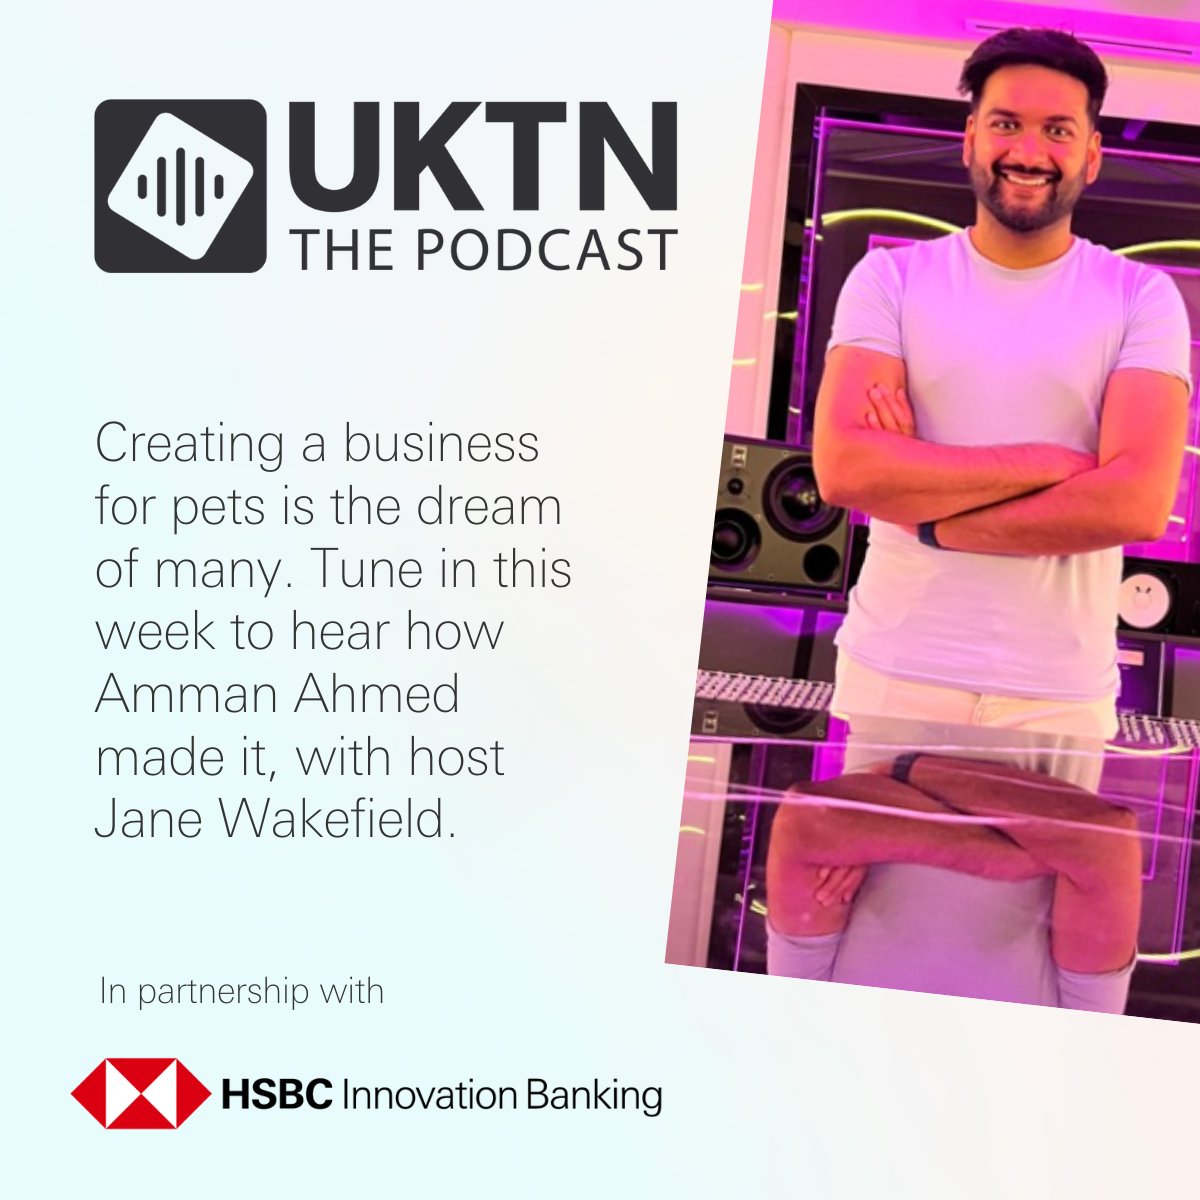 Music For Pets founder @AmmanAmd discusses how he built a successful brand from the ground up on the latest episode of the @UKTNofficial podcast. Listen now 🎧 grp.hsbc/6014uxon0 Partnered by @HSBCInnovation Banking. #UKTNpodcast #Founders #UKtech